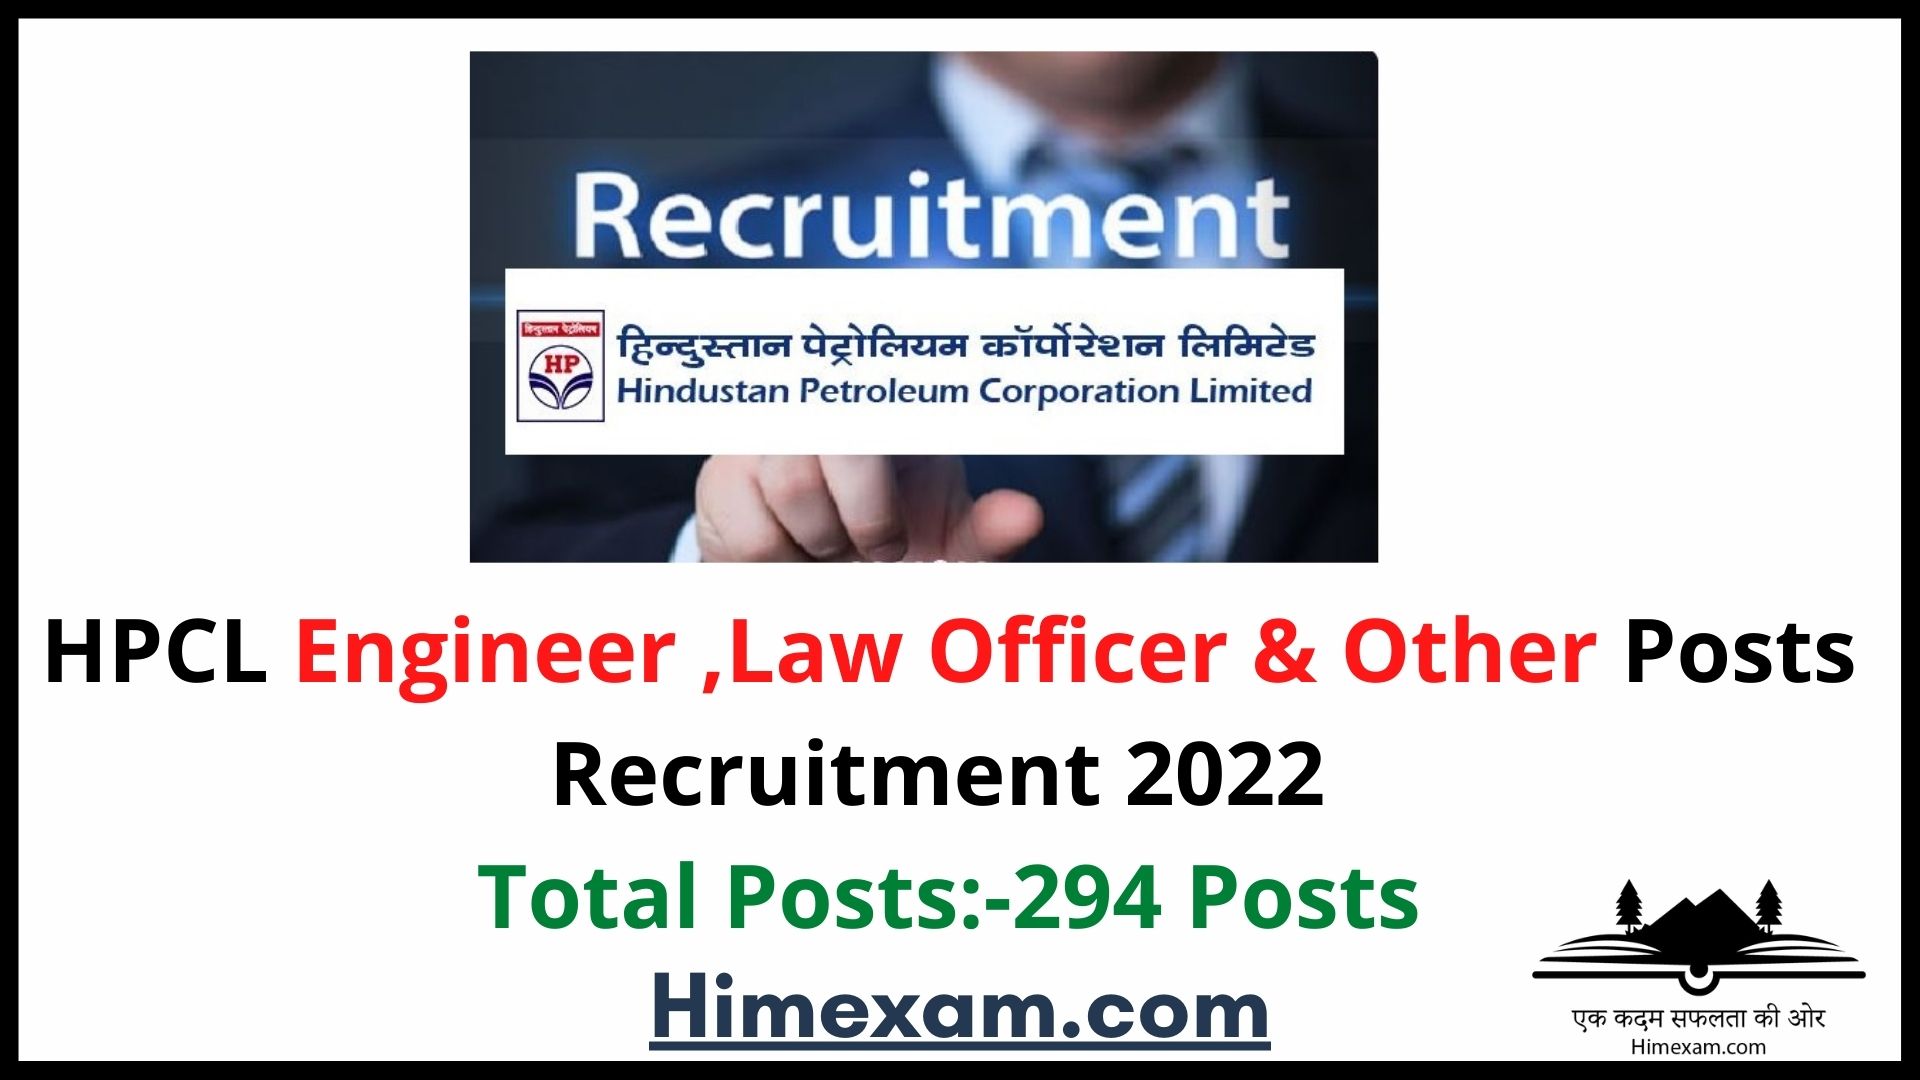 HPCL Engineer ,Law Officer & Other Posts Recruitment 2022